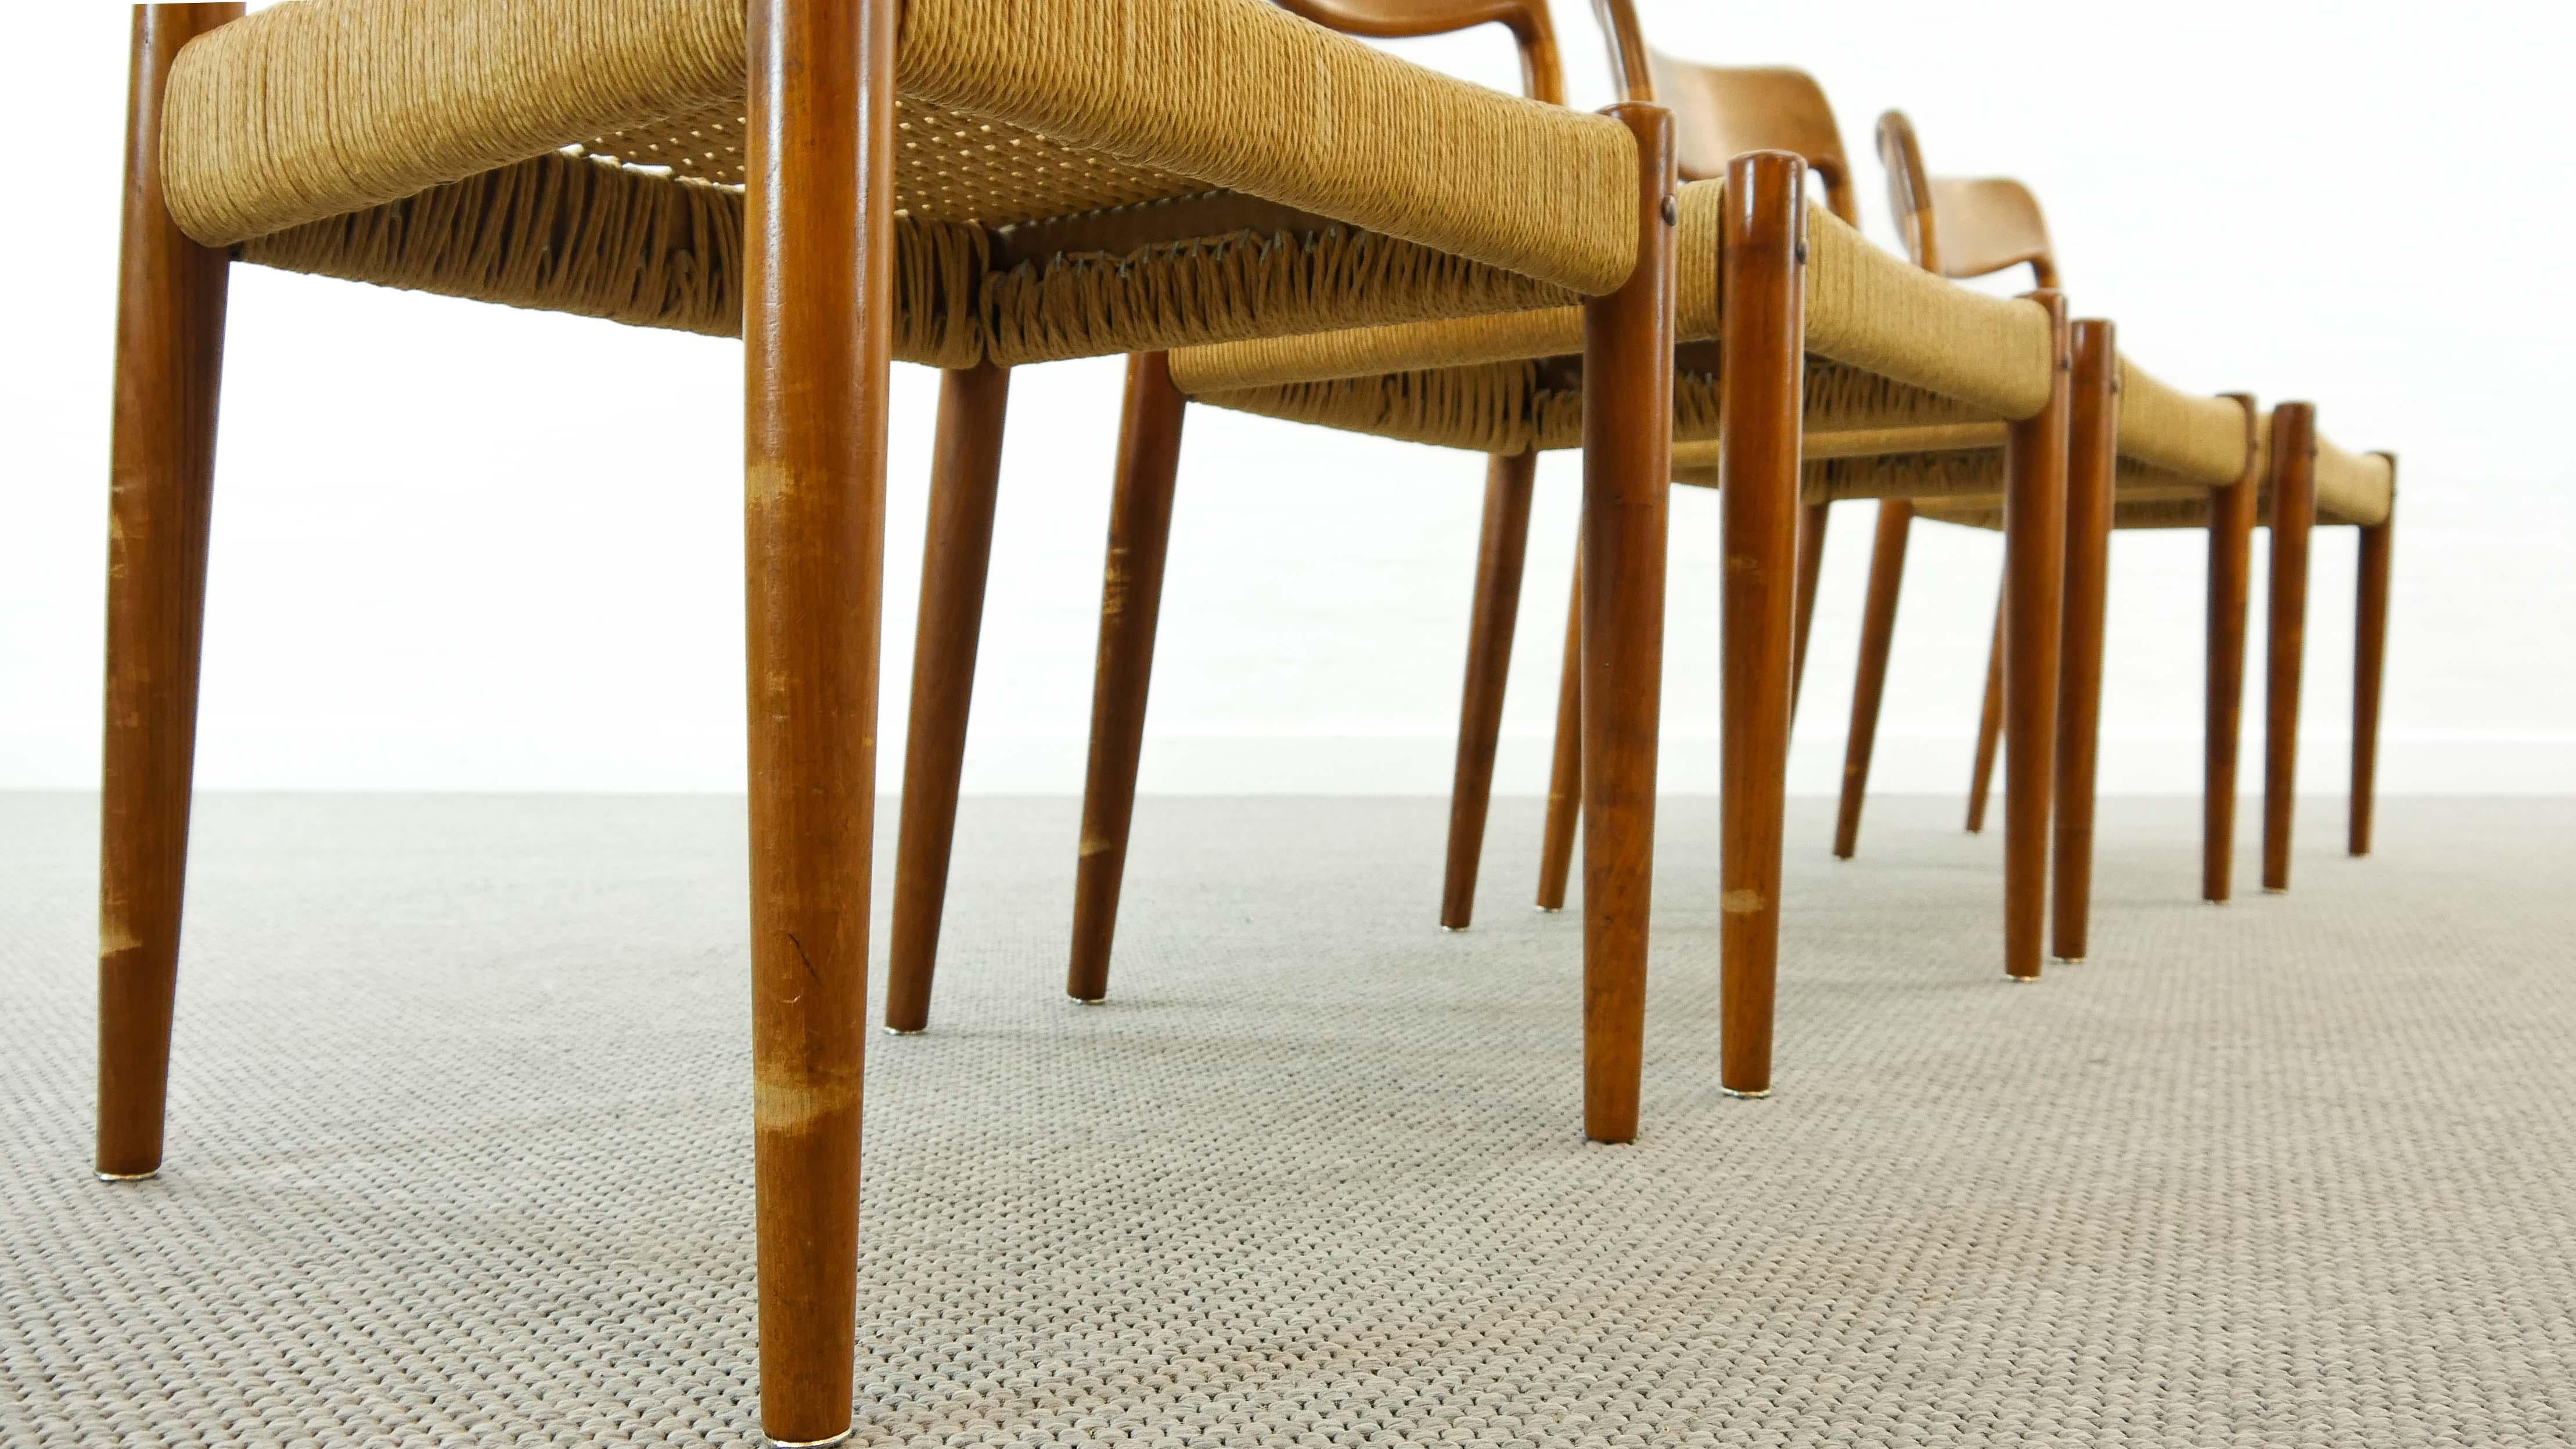 Set of 4 Teak Chairs with Papercord Seat by Johannes Andersen for Uldum, Denmark 6